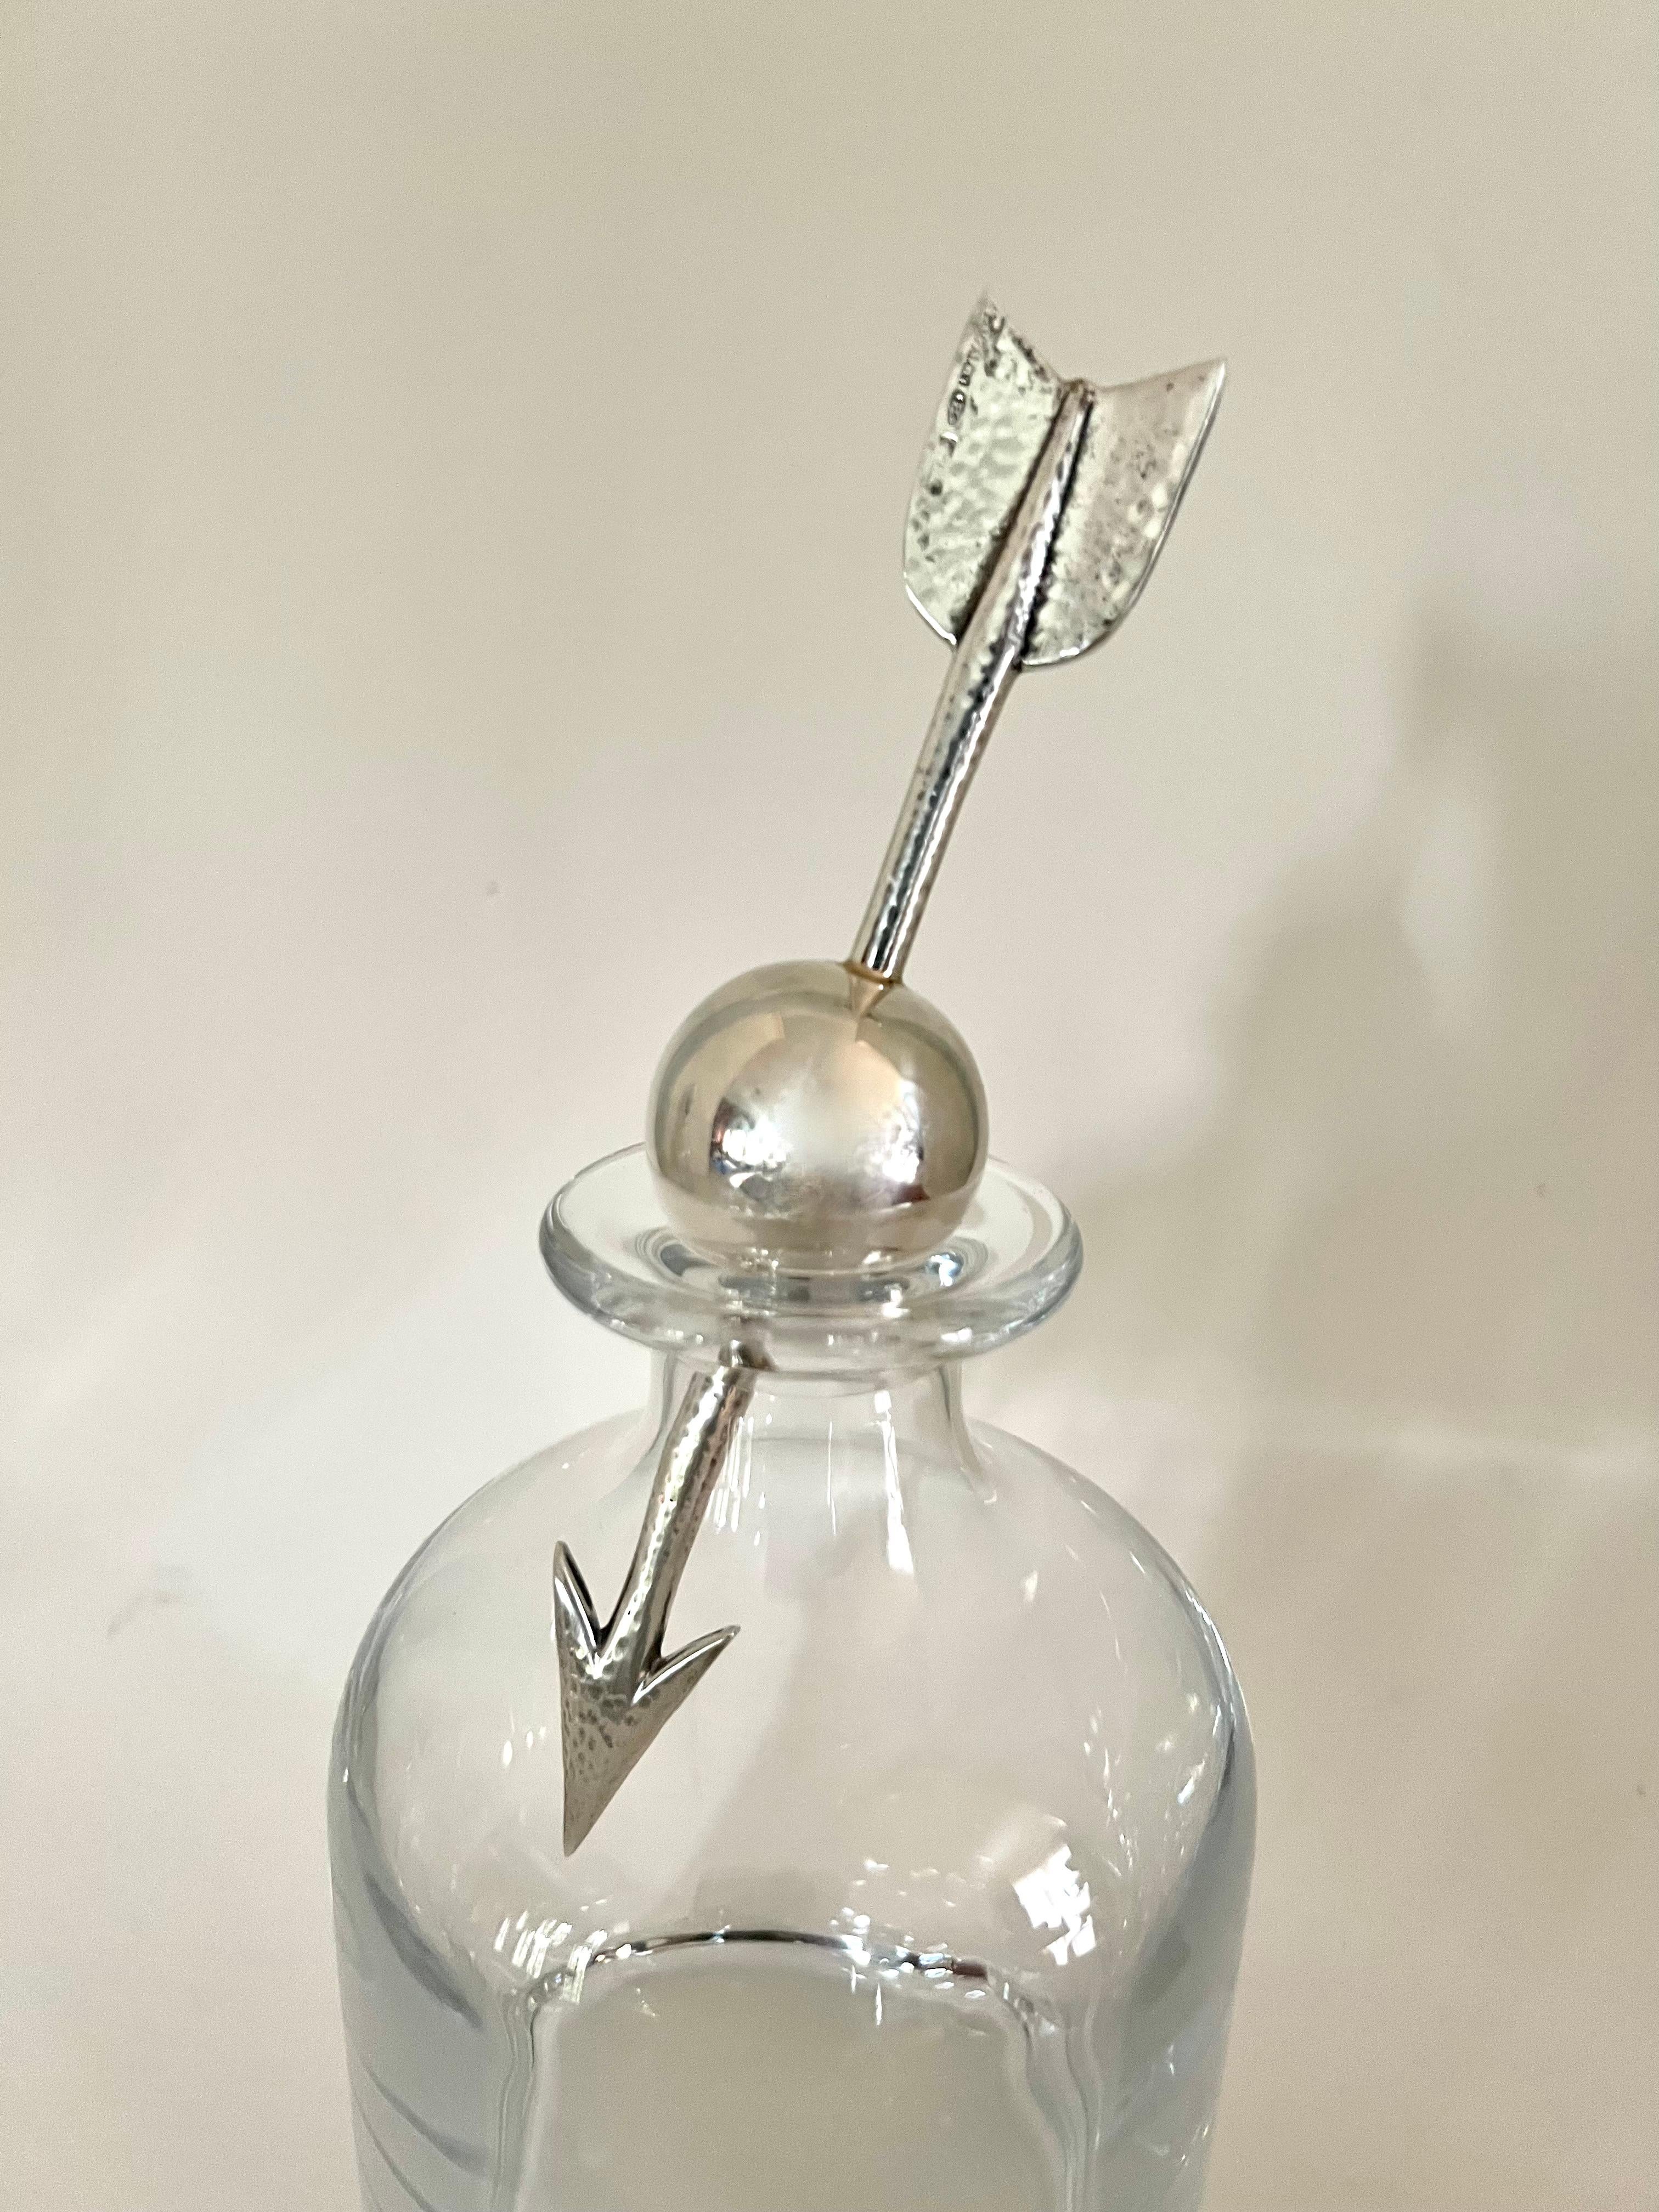 Crystal Italian Pampaloni Decanter with Hammered Silver Ball and Arrow Stopper 1